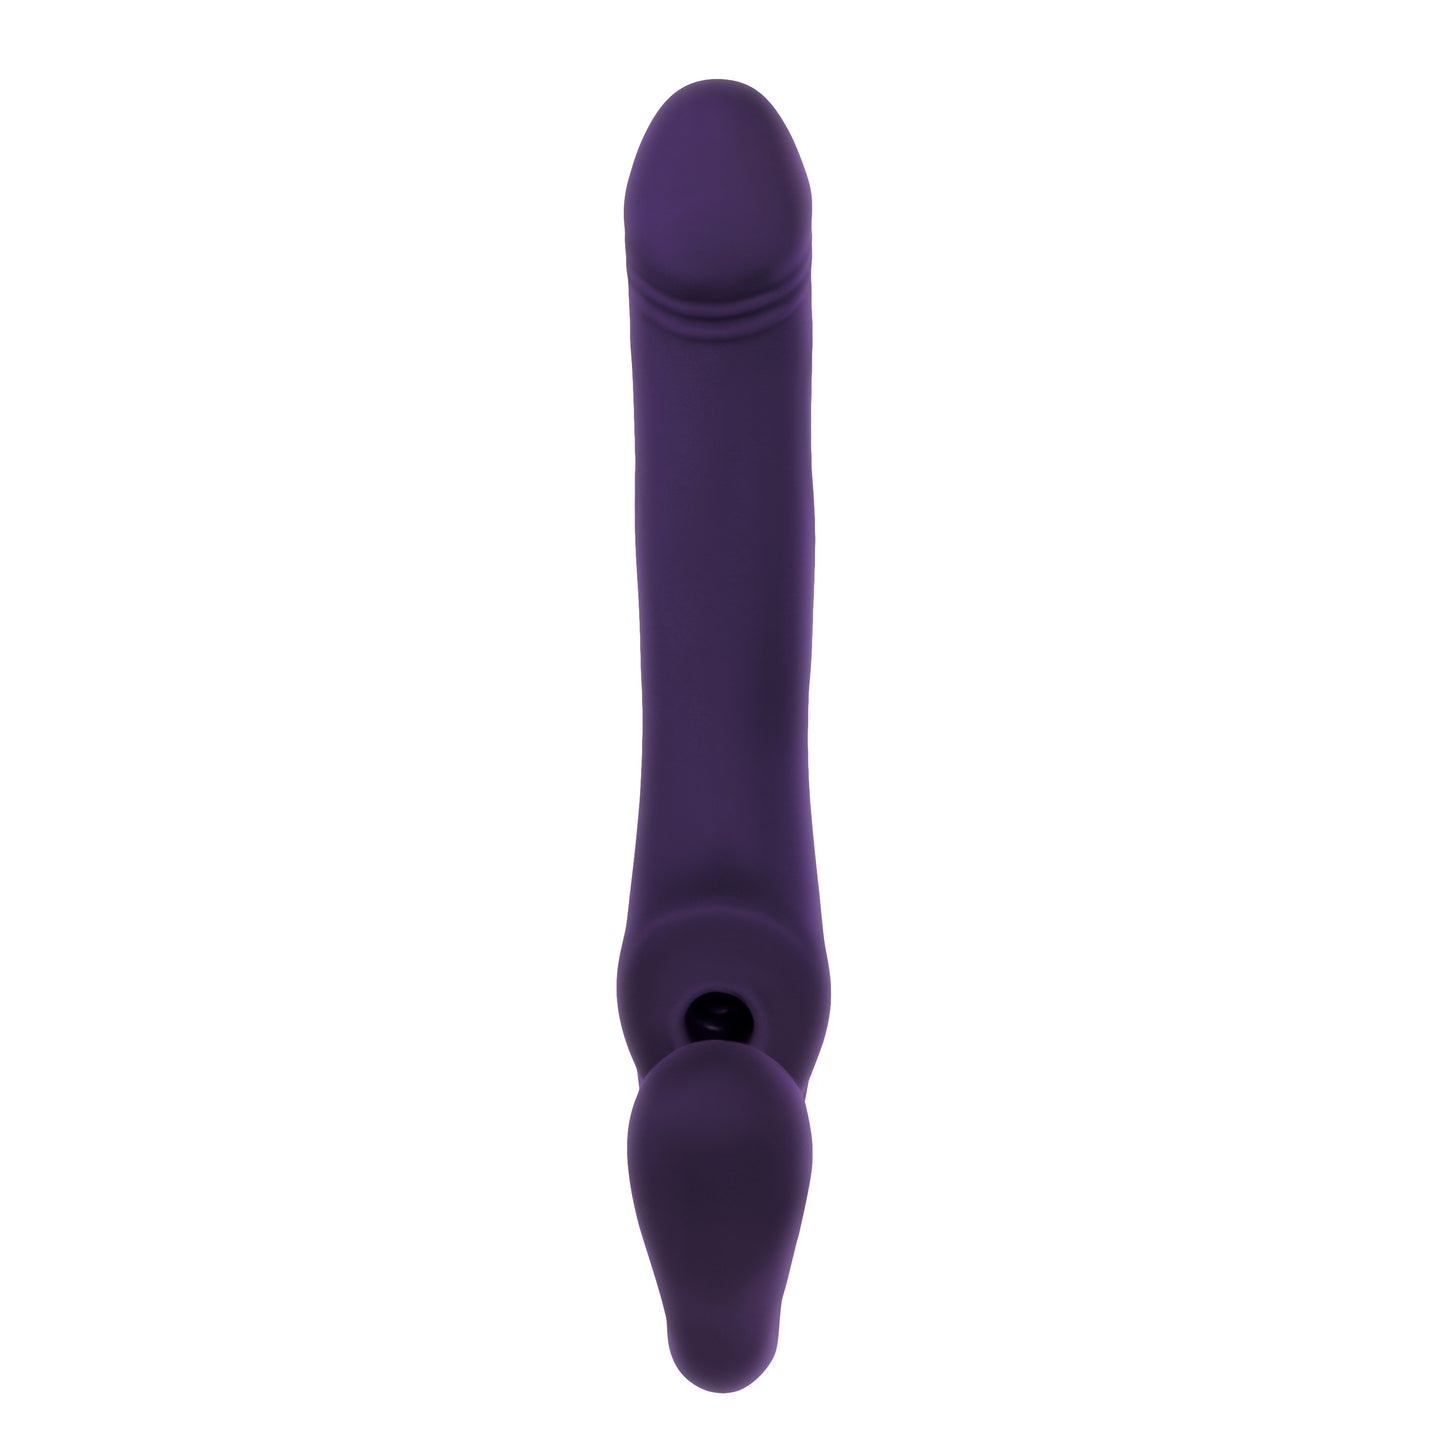 Buy Sex Toys Online - My Temptations Adult Store